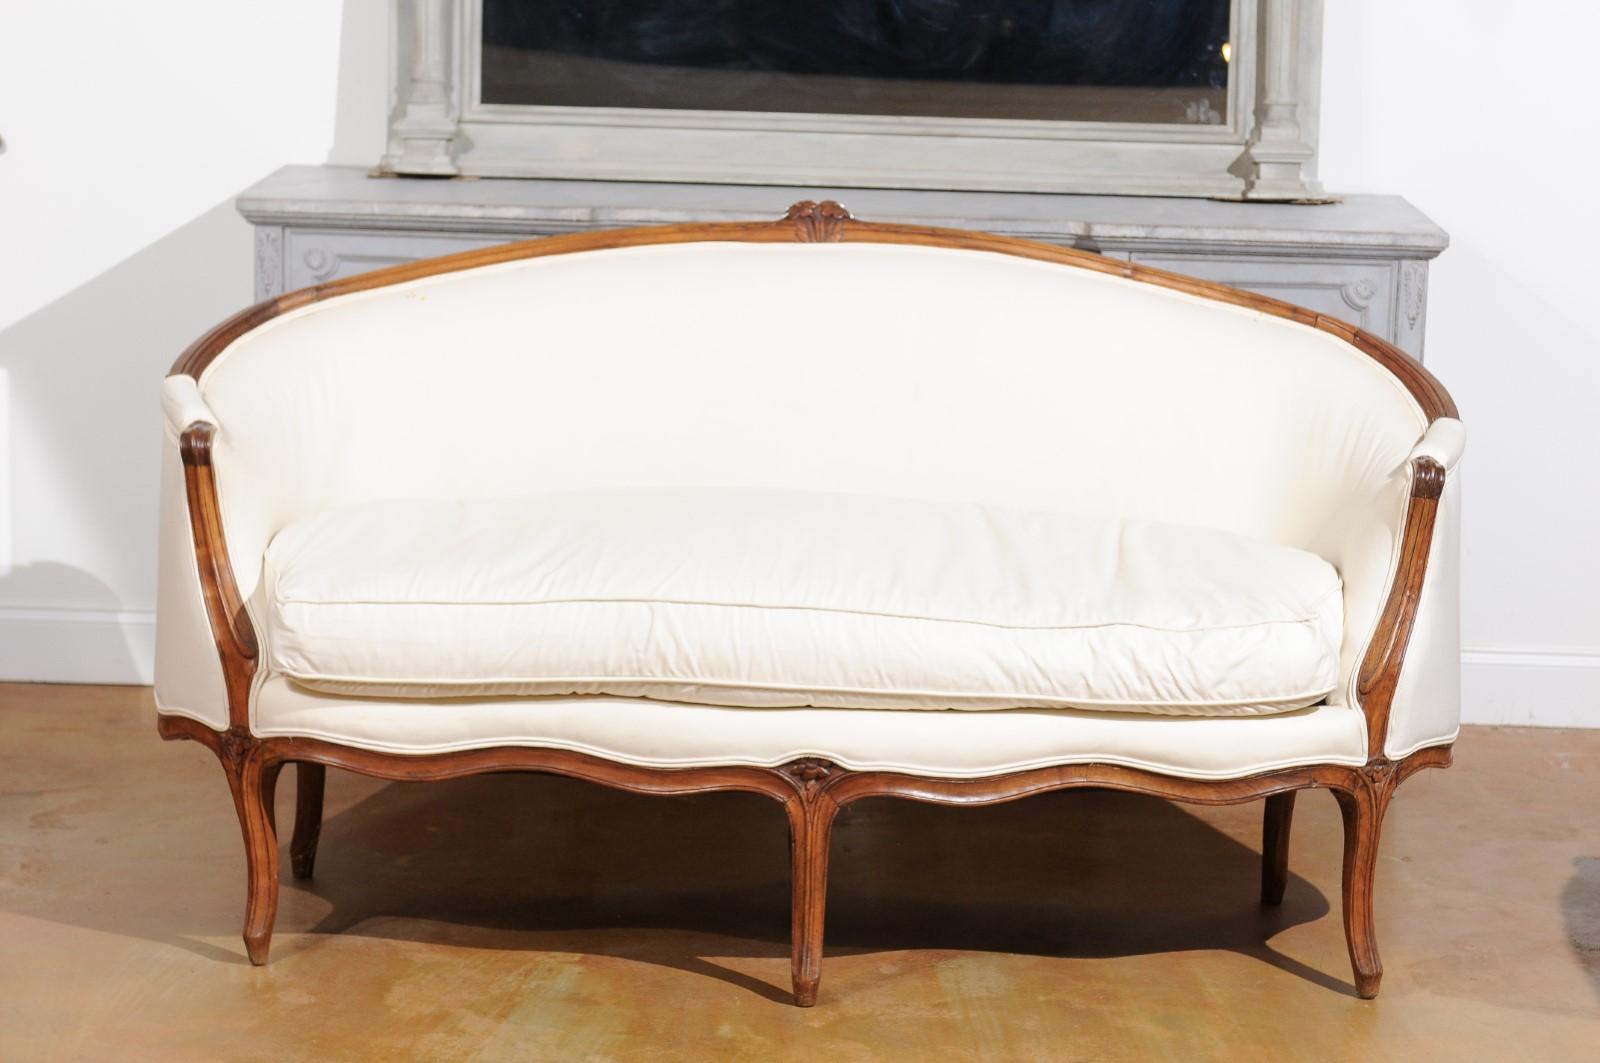 A French Louis XV period walnut settee from the mid-18th century, with cabriole legs and new upholstery. Born in France during the reign of King Louis XV 'Le Bien-Aimé' (the Beloved), this exquisite settee features a curved back flowing seamlessly